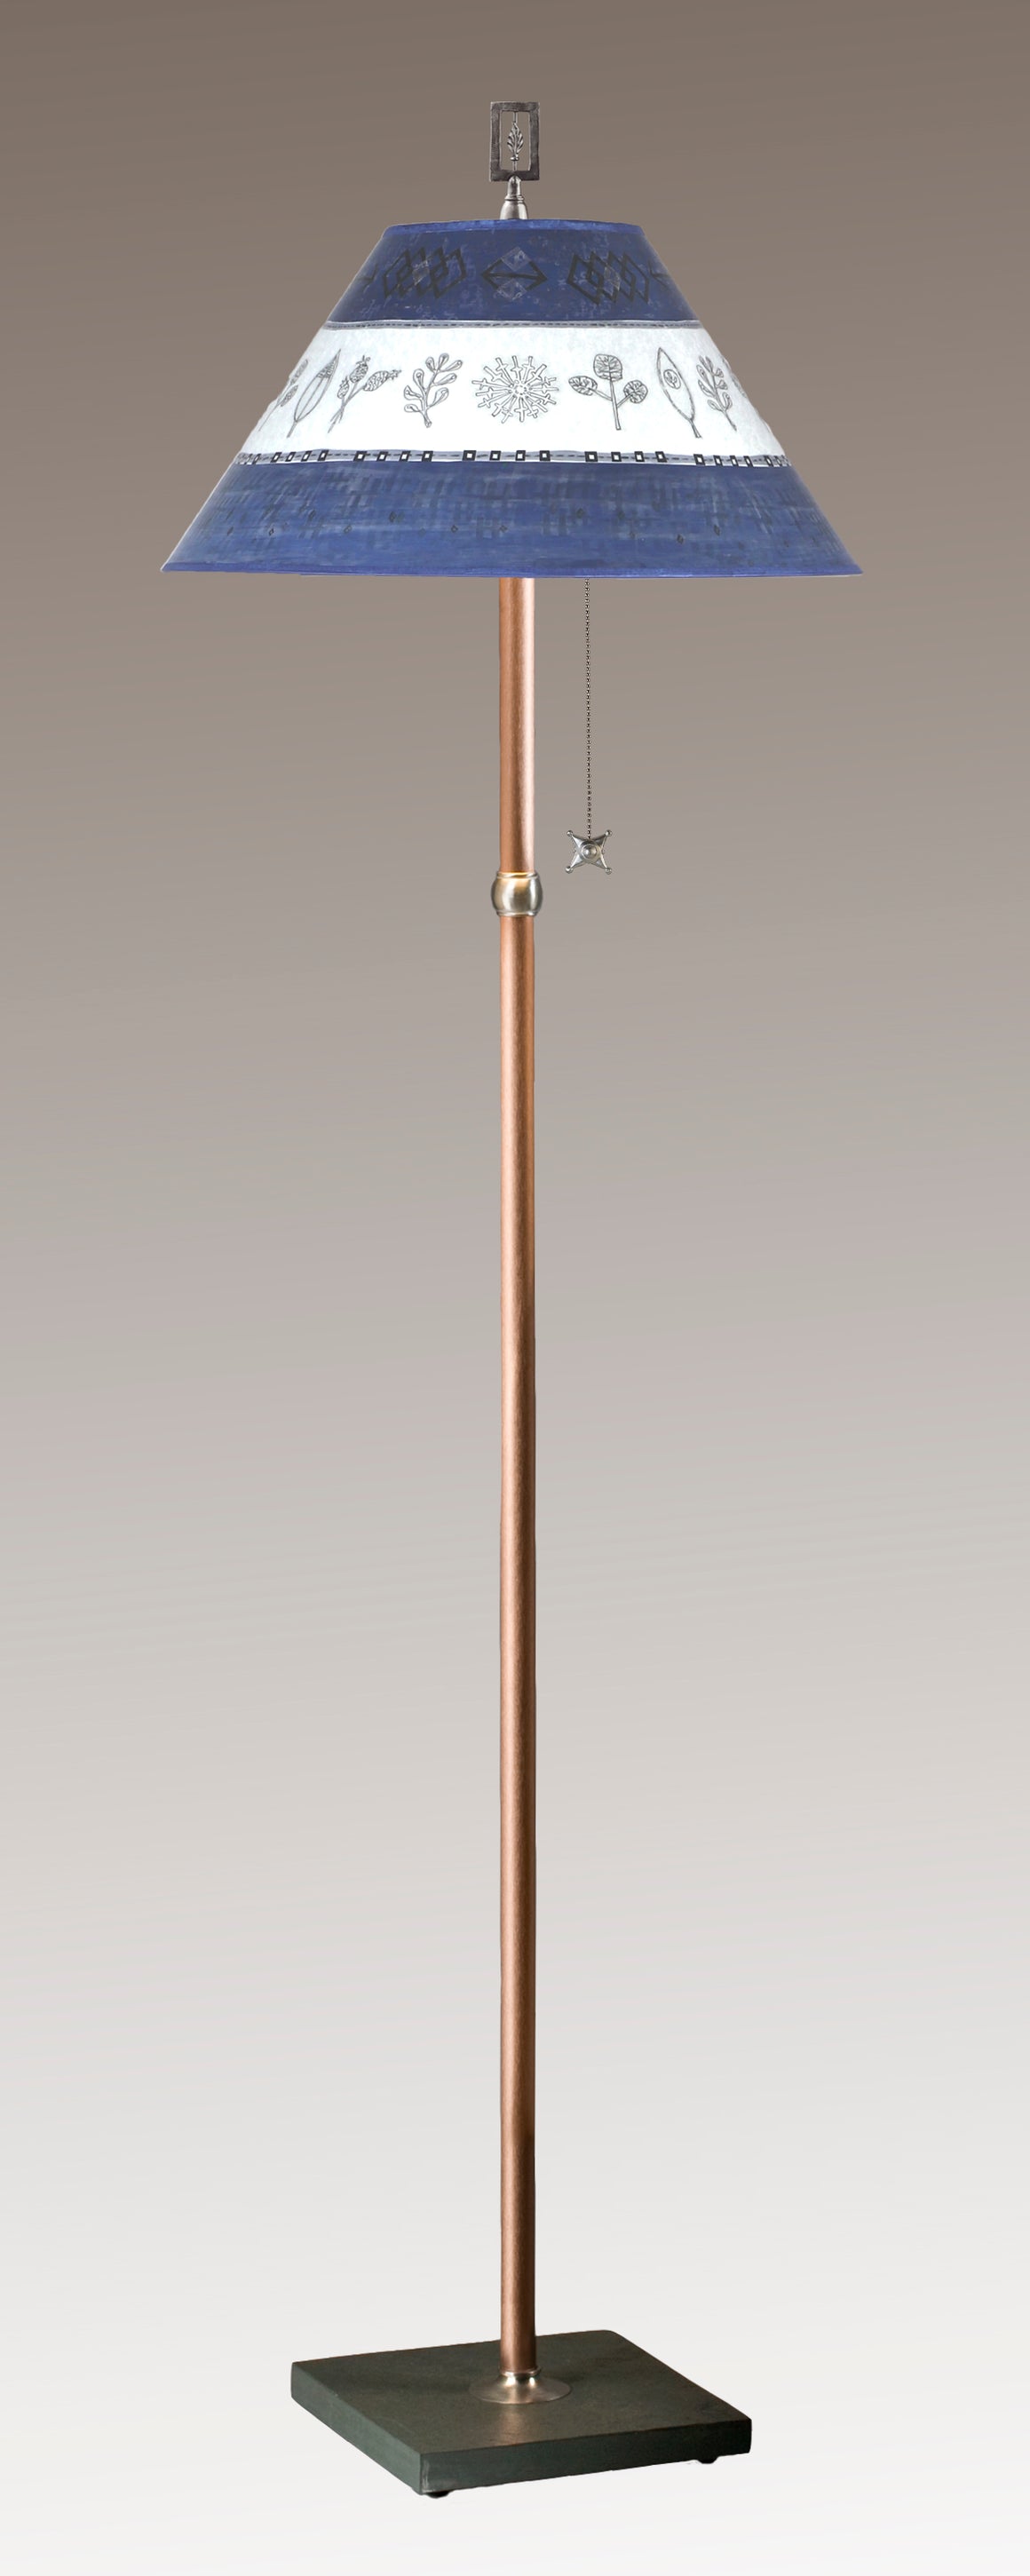 Copper Floor Lamp with Large Conical Shade in Woven Sprig & Sapphire